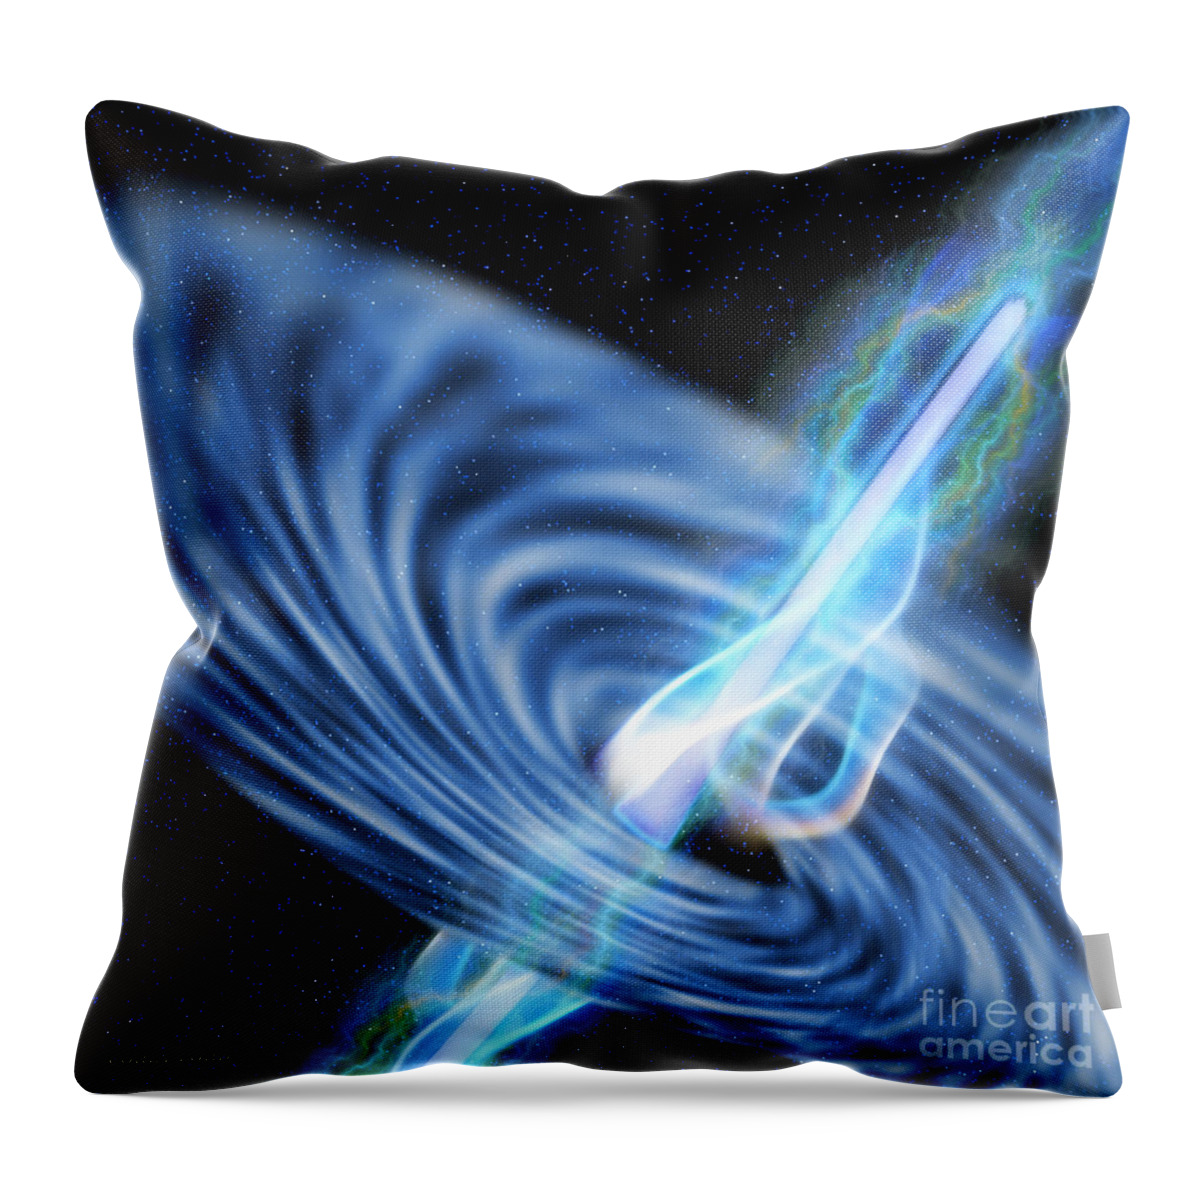 Black Hole Throw Pillow featuring the painting Black Hole Radiation by Corey Ford